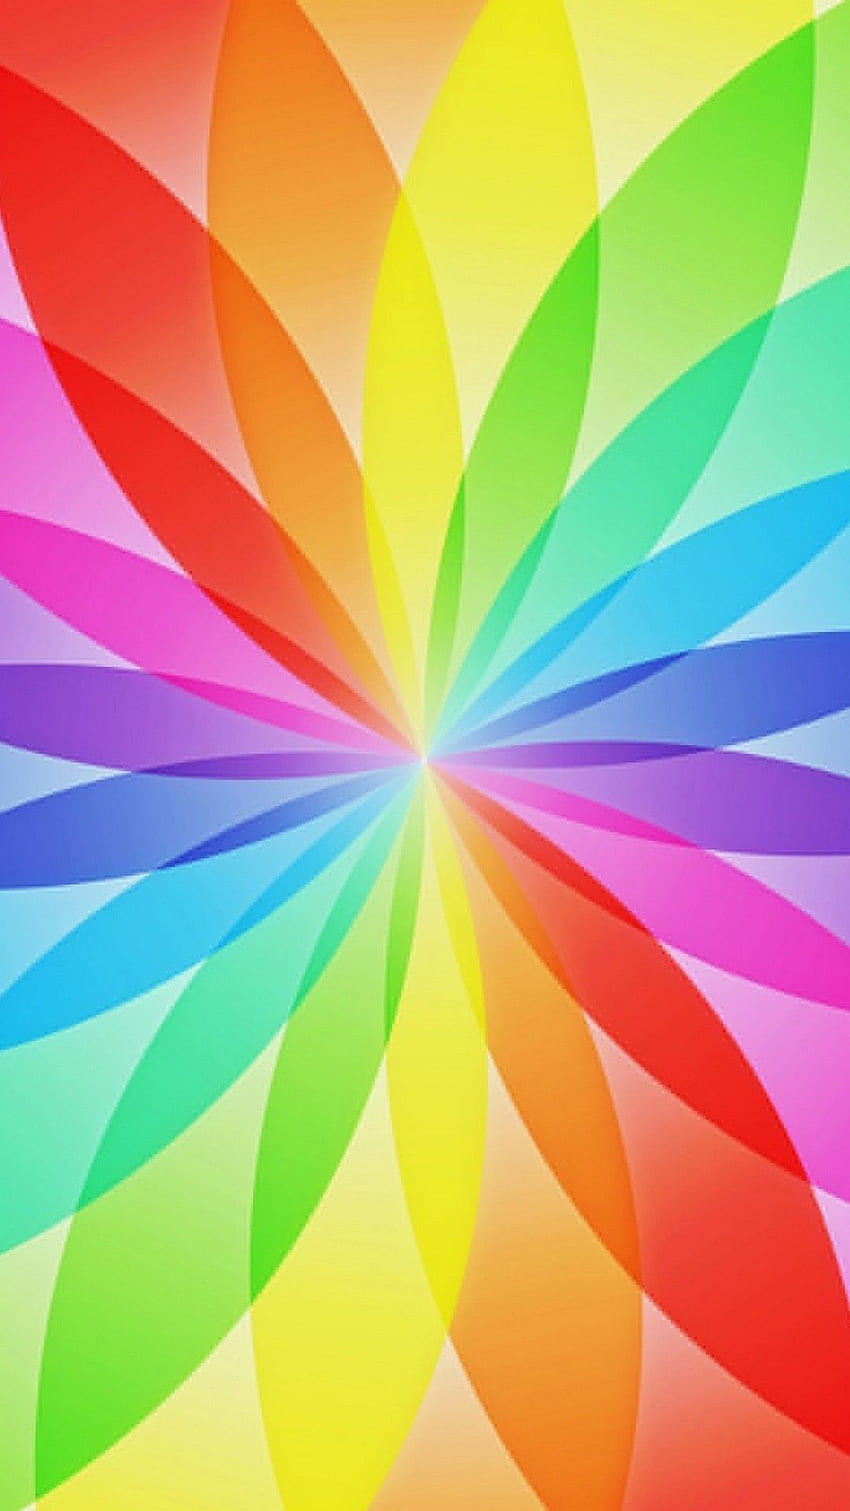 100 Rainbow Backgrounds  World of Printables